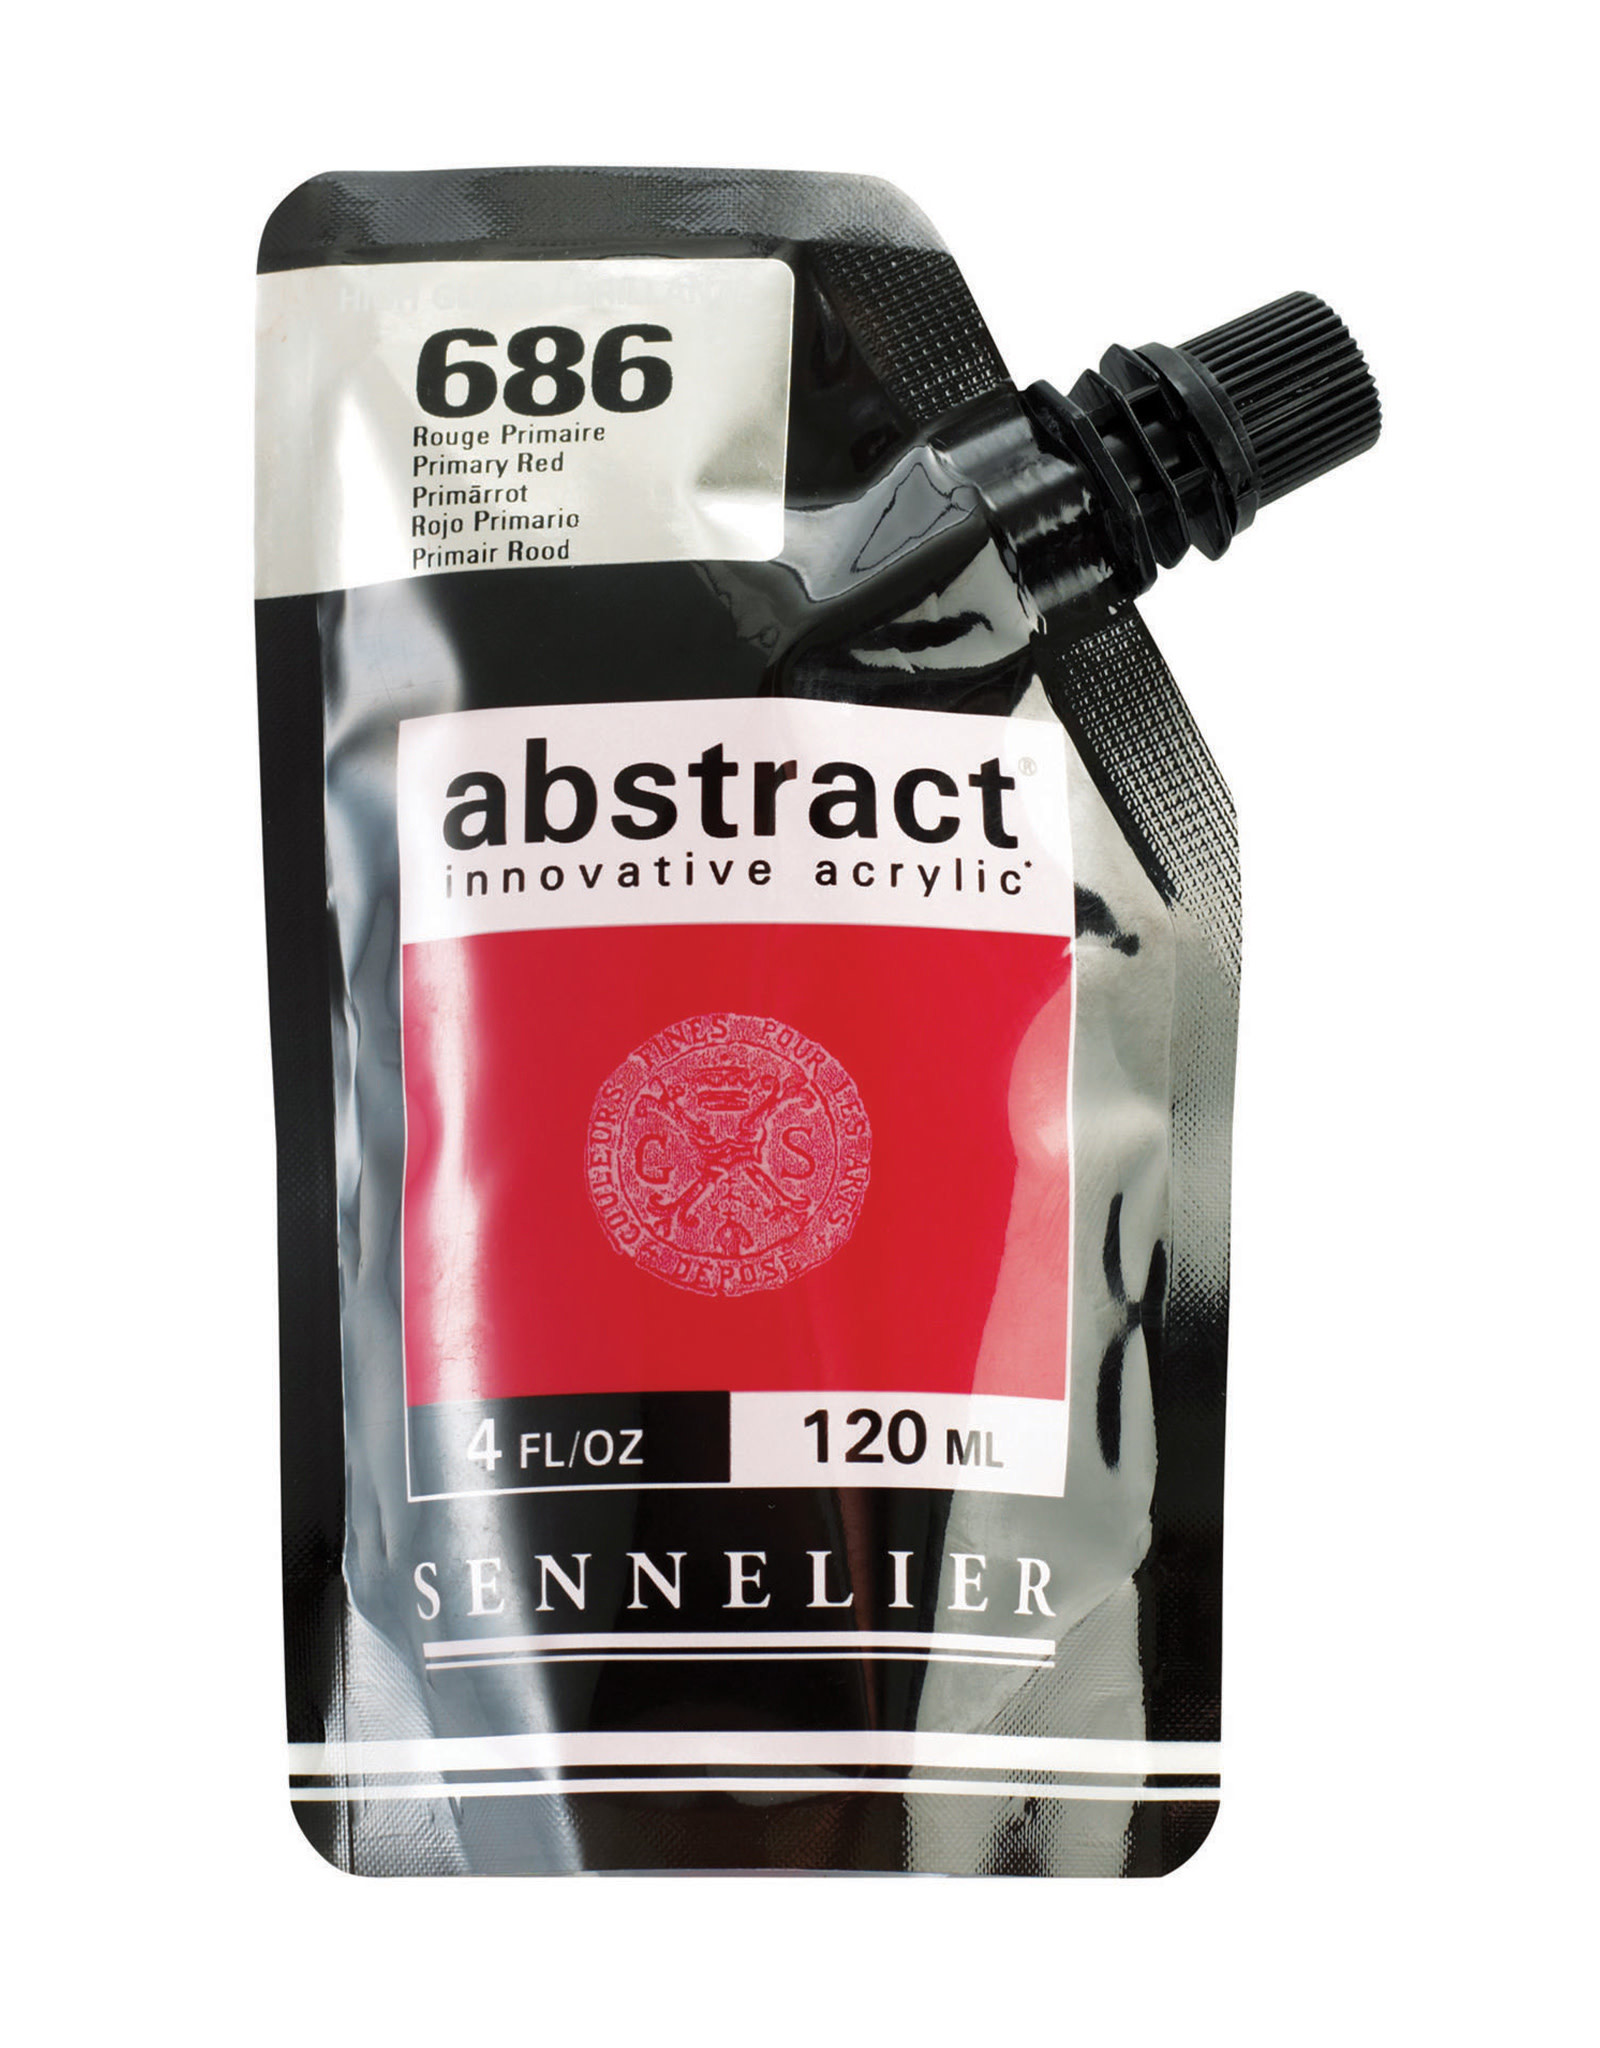 Sennelier Sennelier Abstract Acrylic, Primary Red 120ml